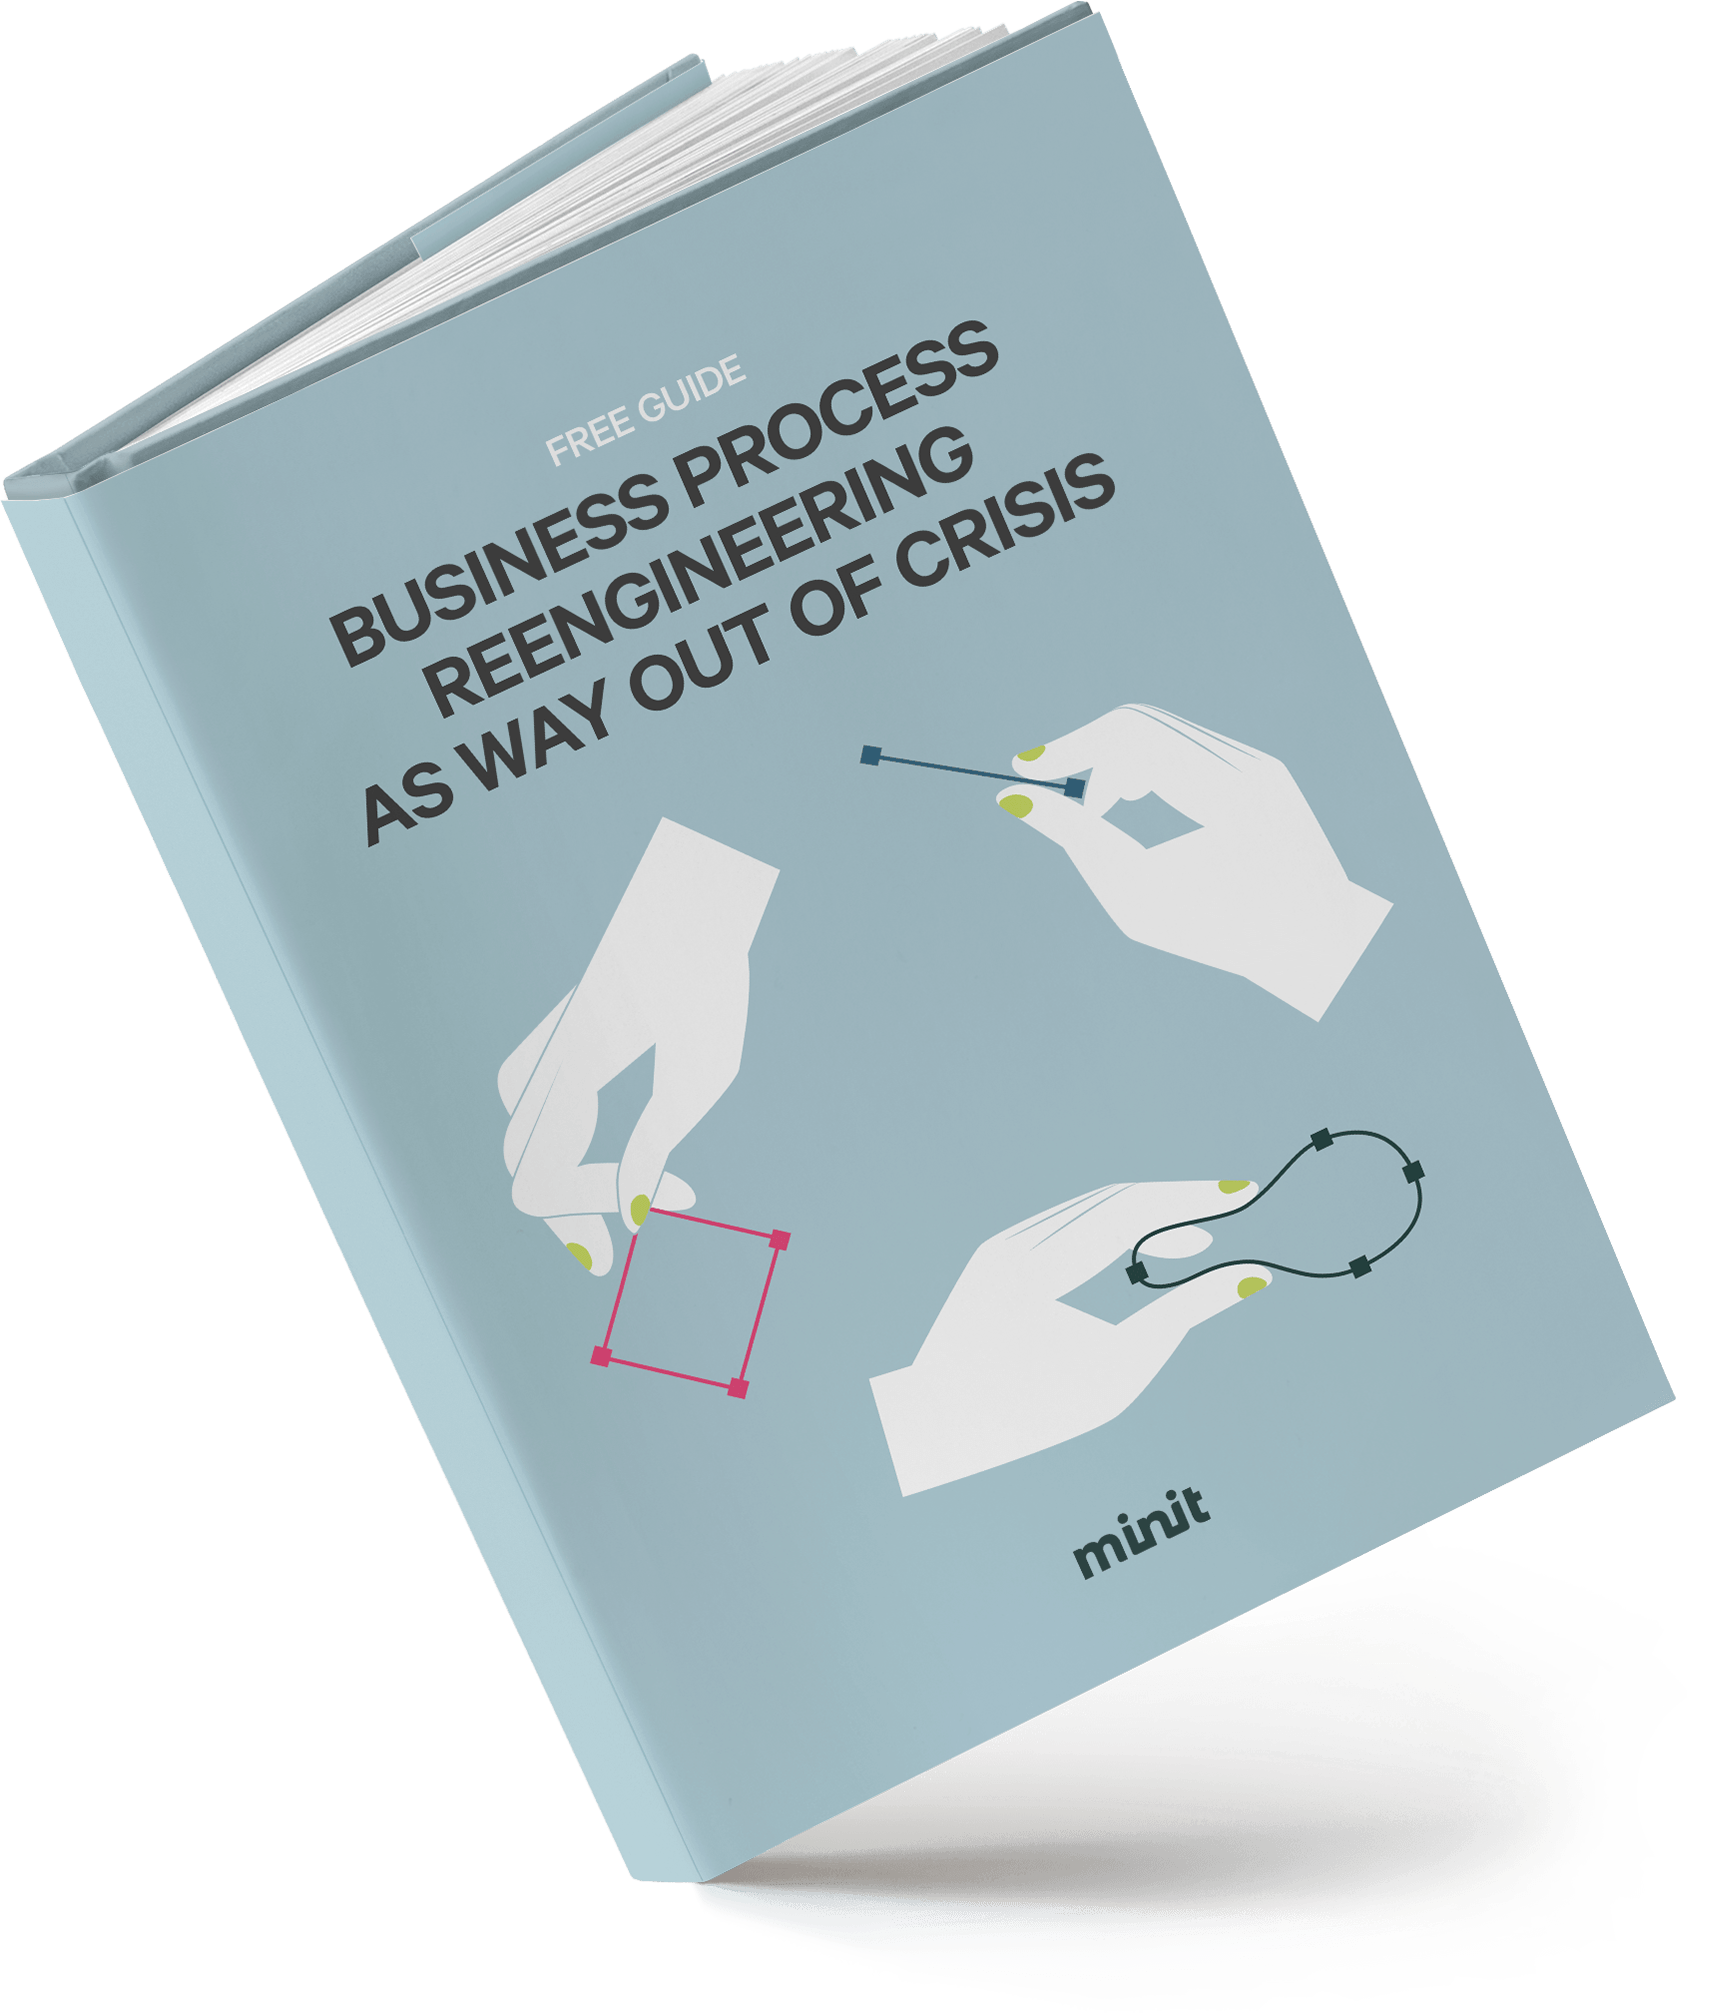 Business Process Reengineering as a Way Out of Crisis